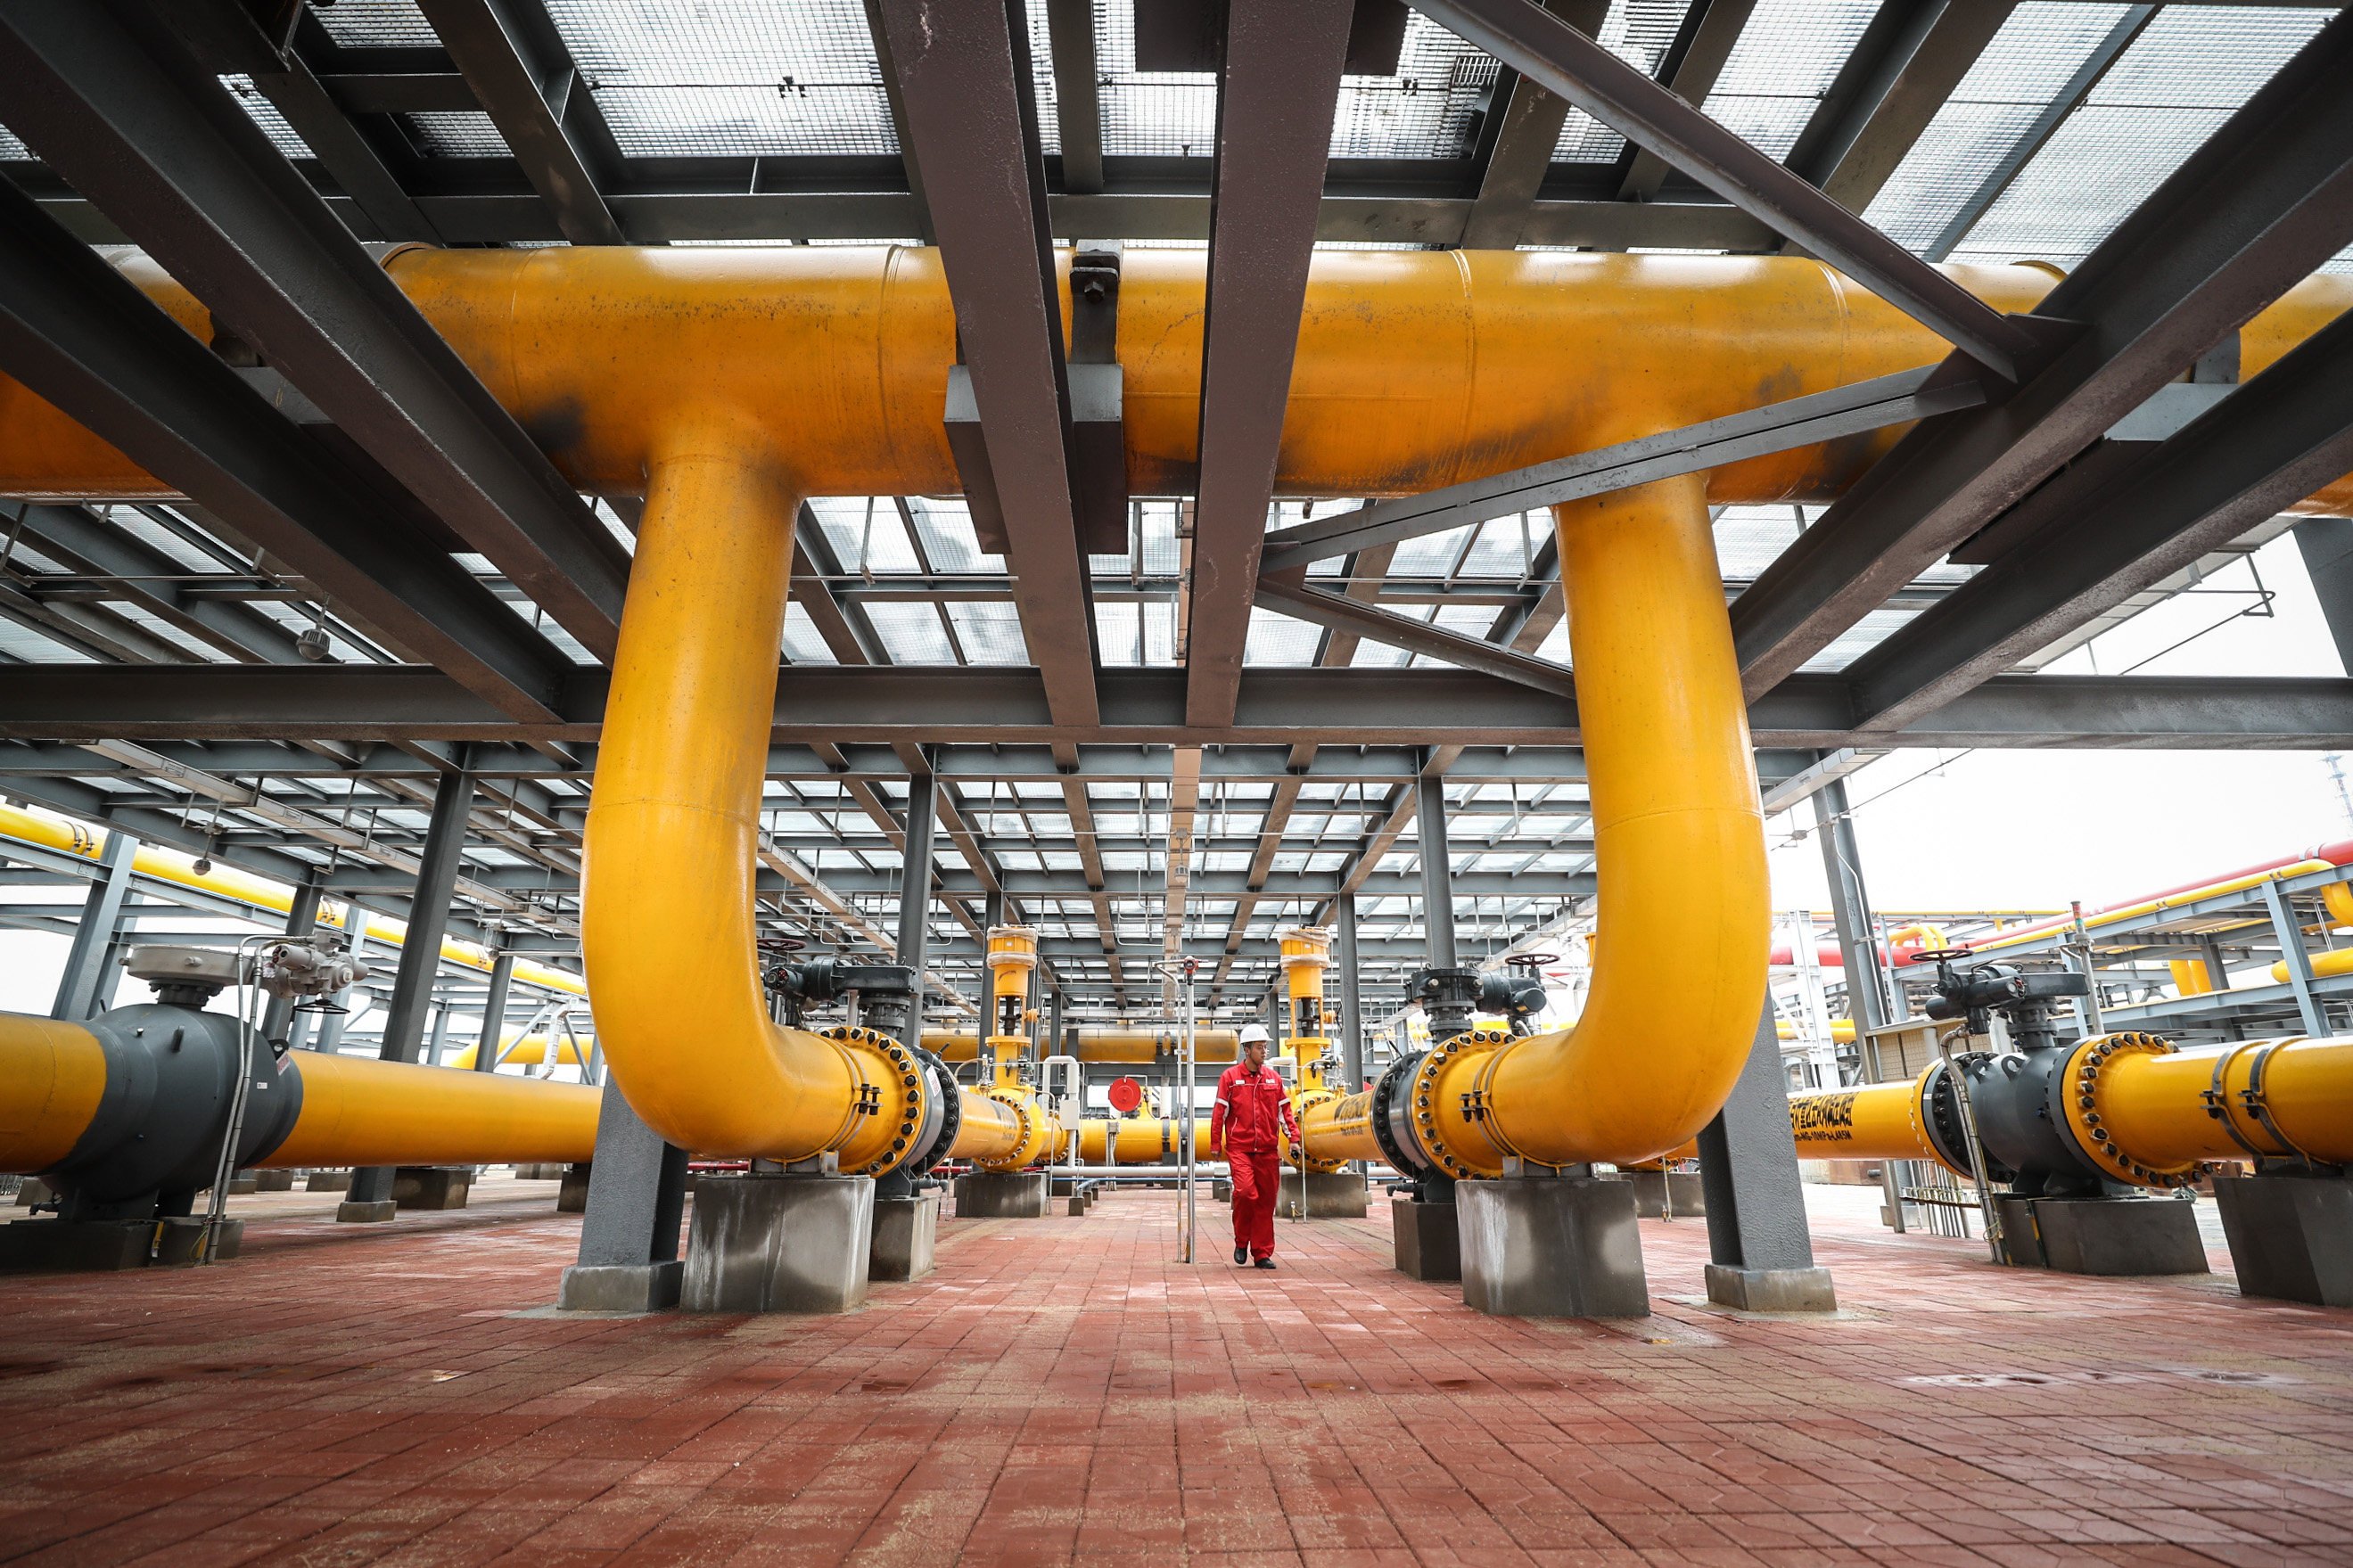 A staff member inspects the Shuangtaizi gas storage area of PetroChina Liaohe Oilfield in Panjin in northeast China’s Liaoning province on June 15. Photo: Xinhua